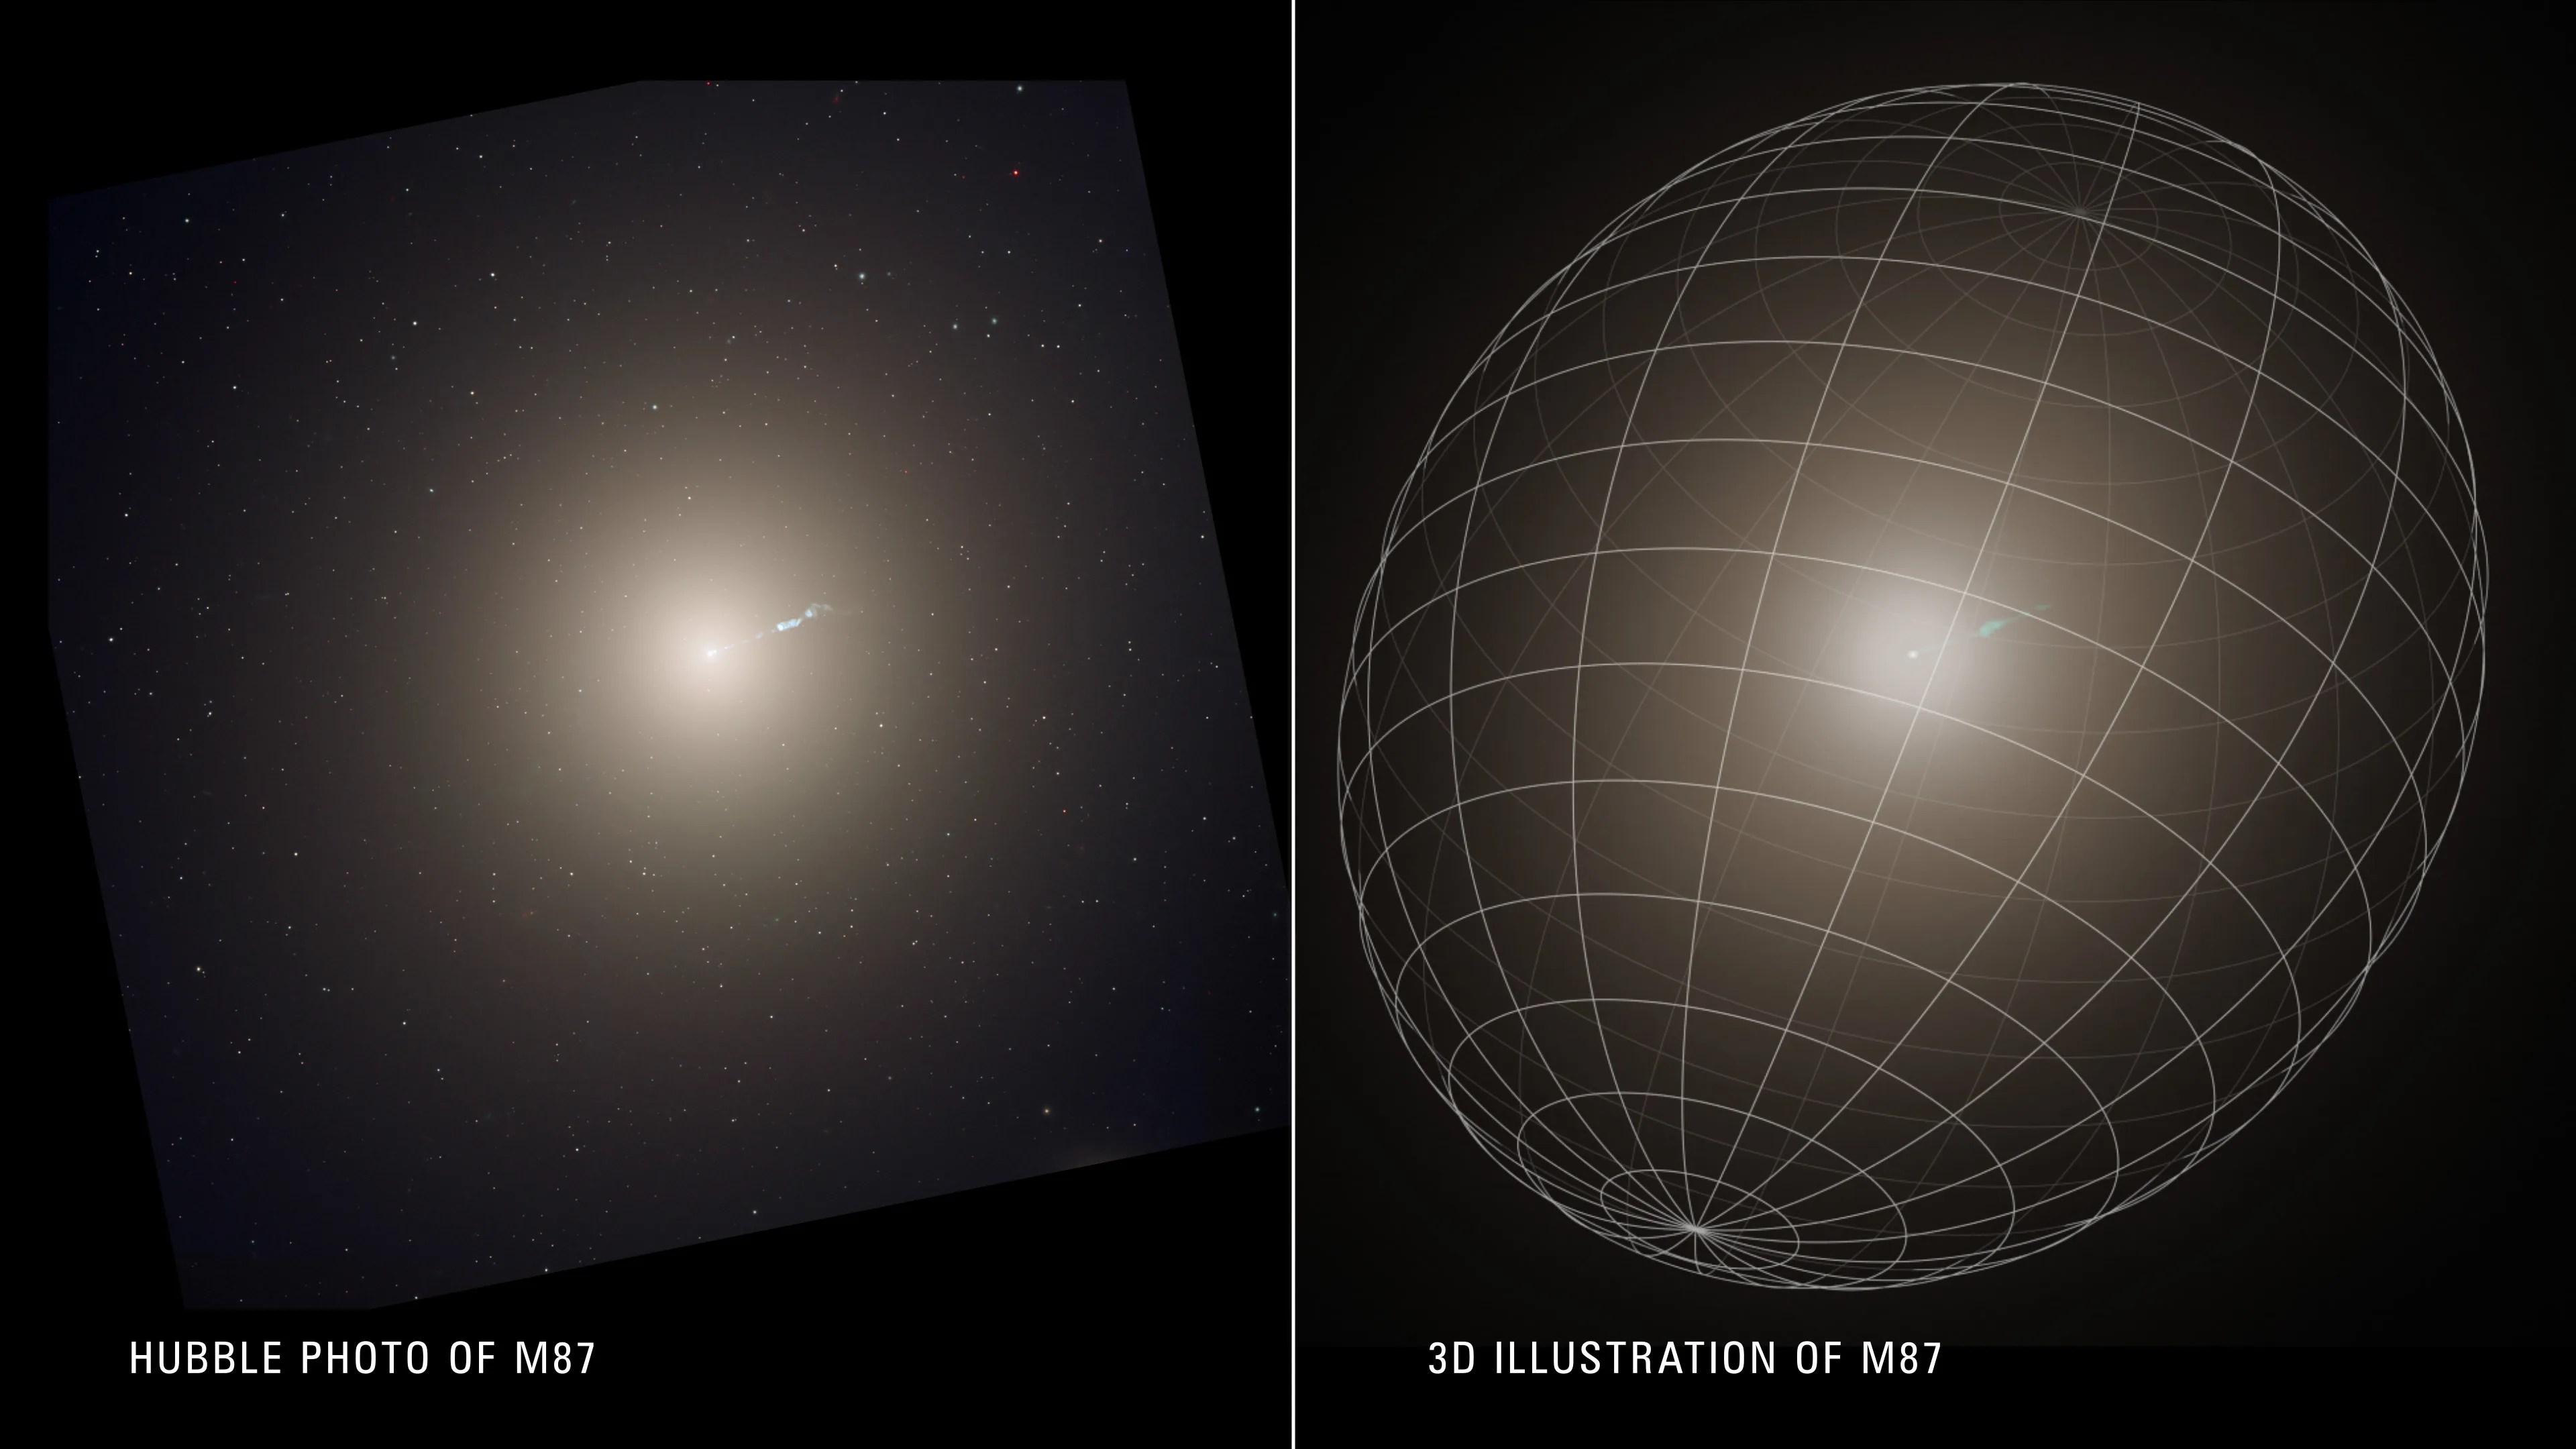 Left, M87 photo: translucent, fuzzy-white galaxy. Blue jet extends outward from point-like core. Right, M87 3D illustration: egg-shaped grid of lines, long axis oriented from lower left to upper right. Simulated galaxy image is within the grid.